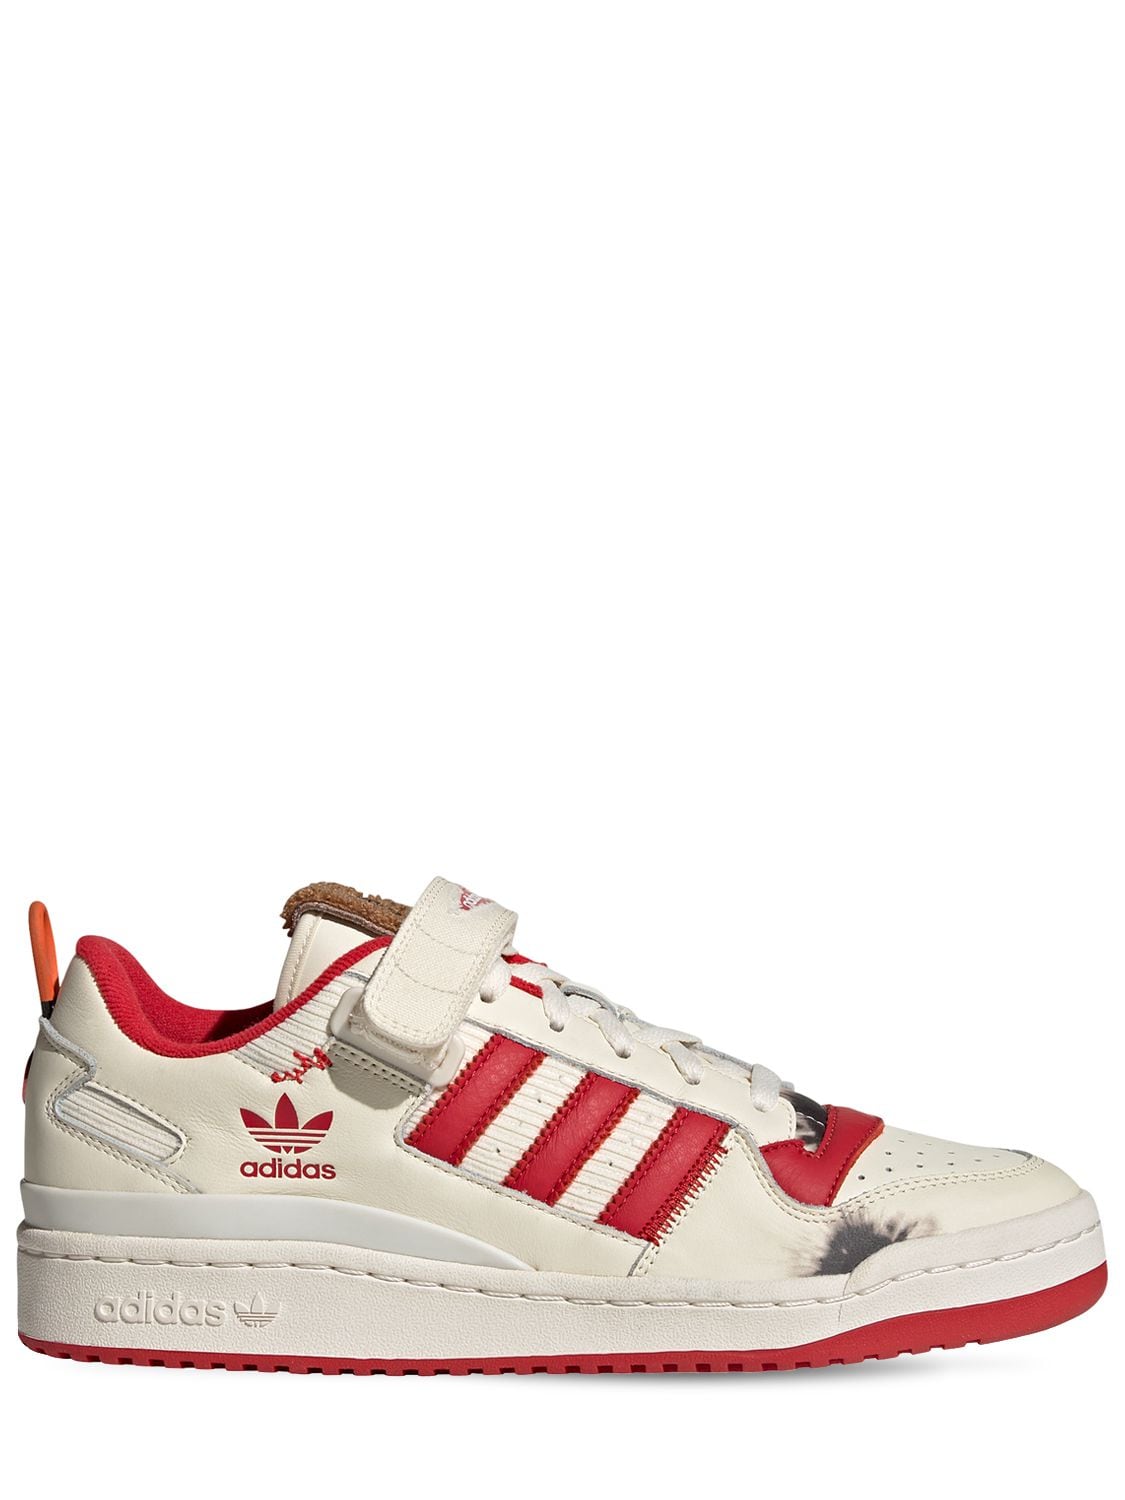 Adidas Originals Home Alone Forum Low Sneakers In White